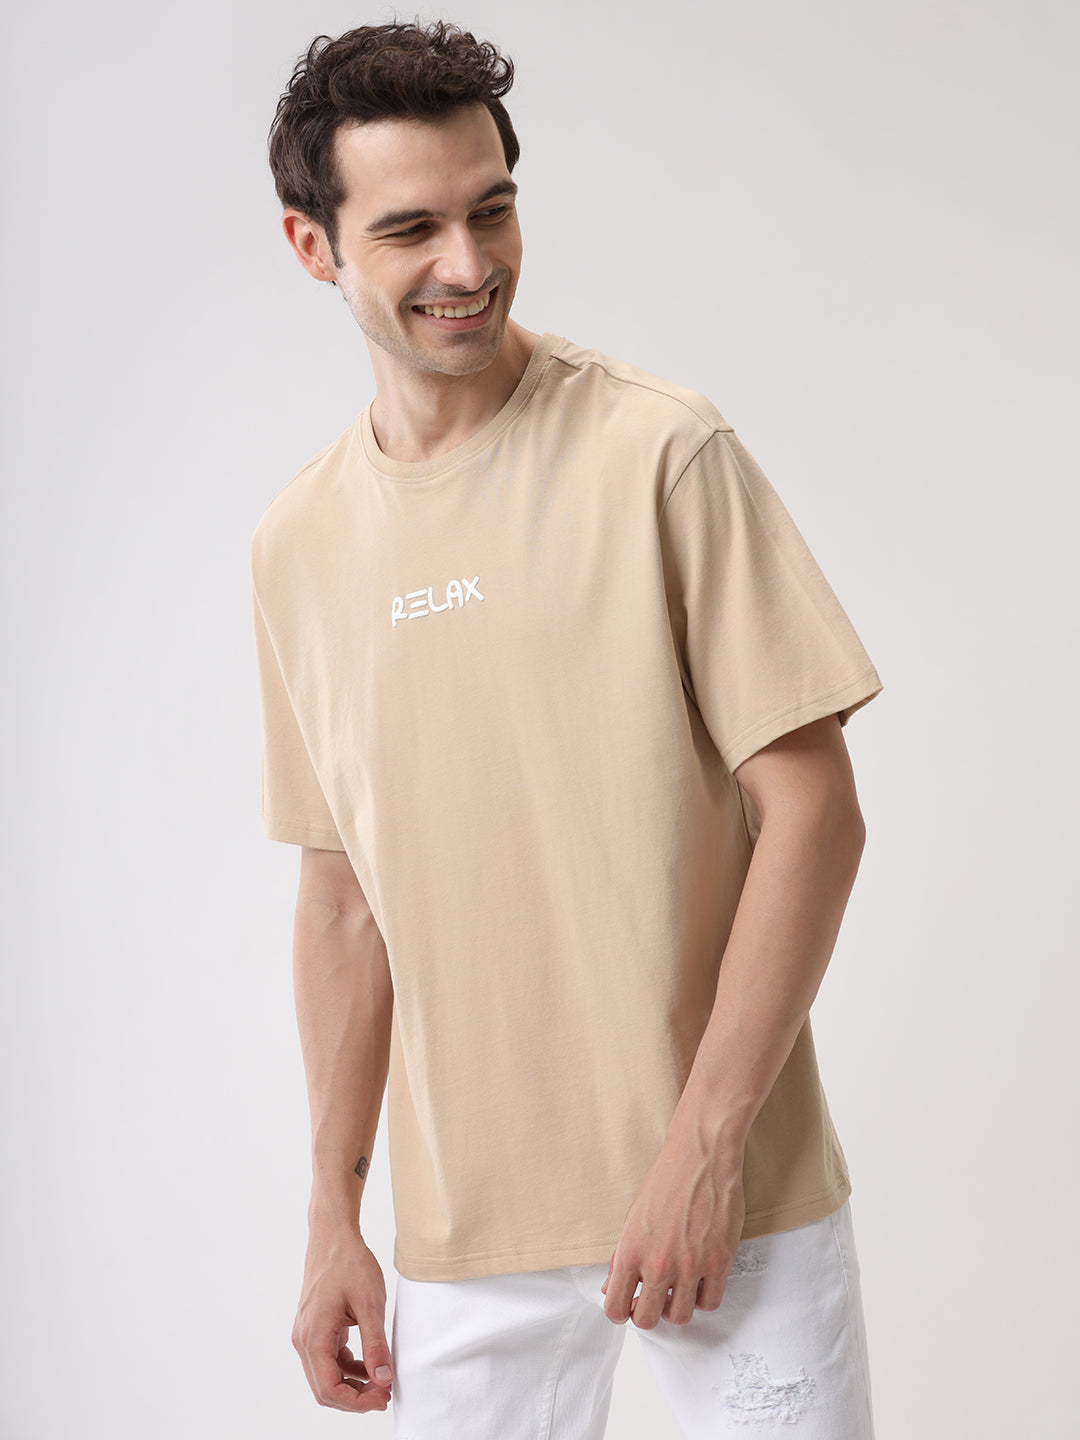 Relax Printed Beige Oversized T-Shirt